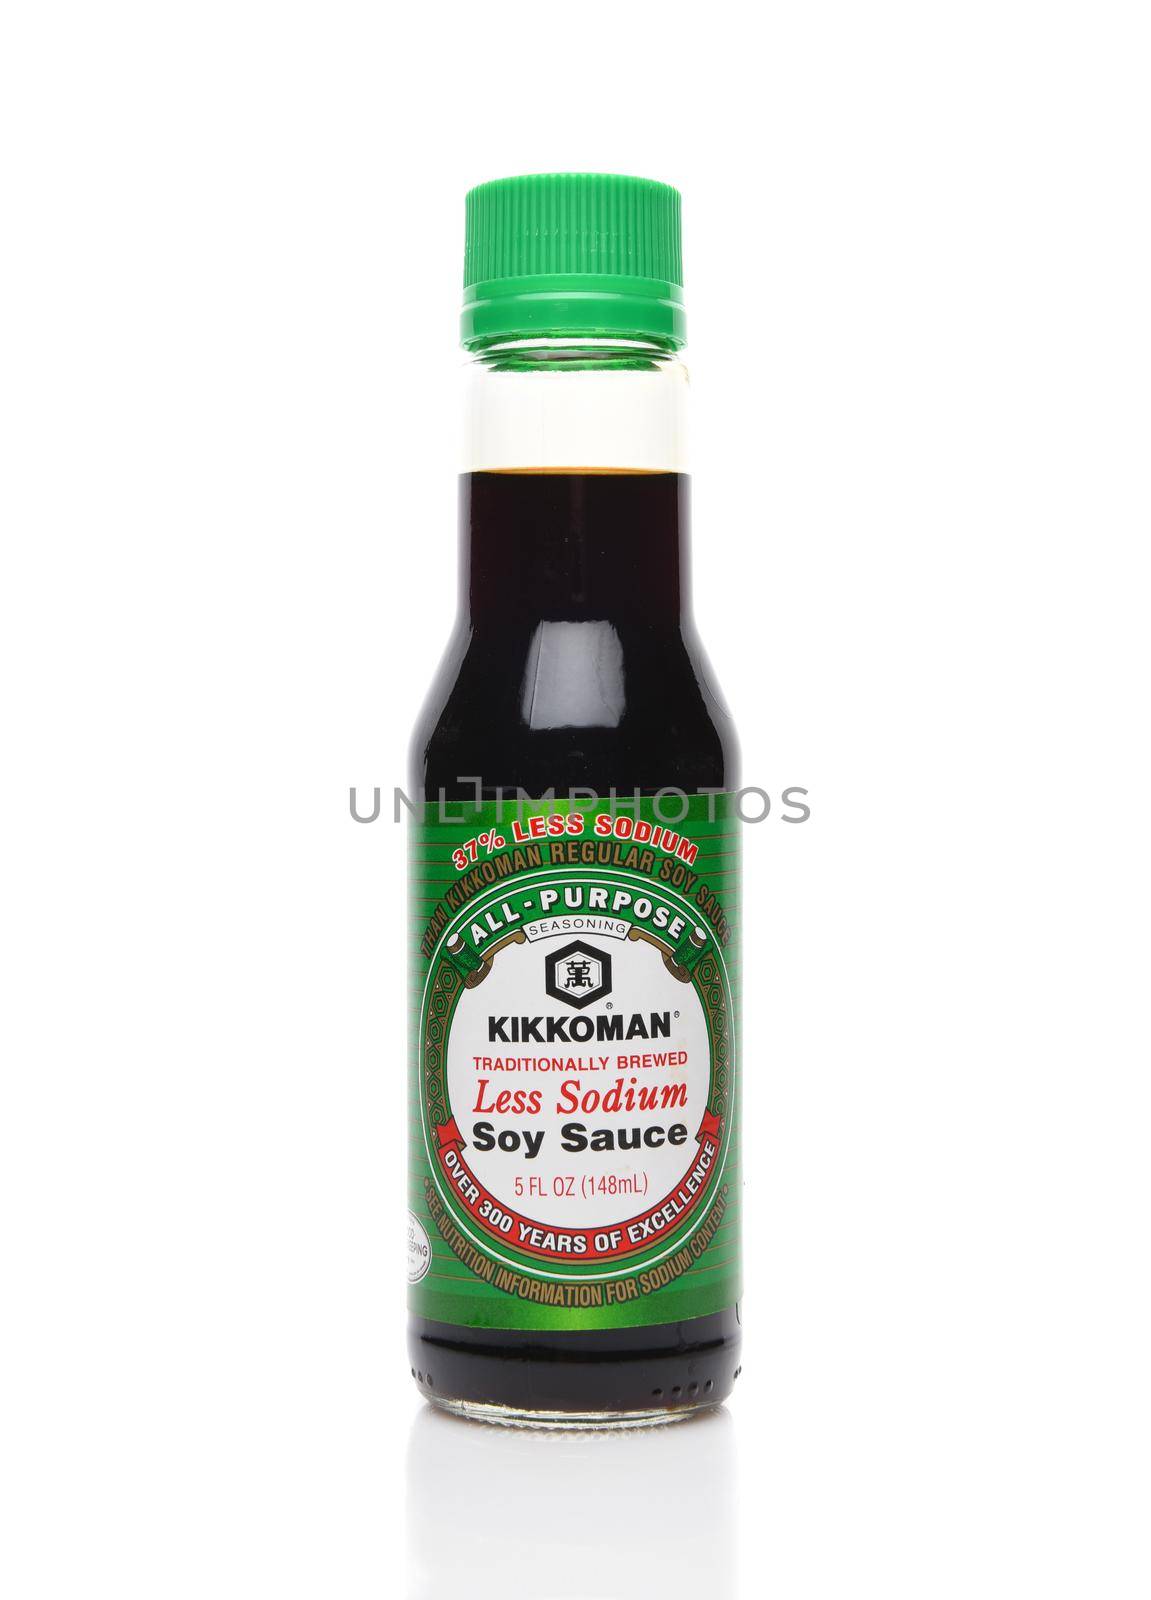 IRVINE, CALIFORNIA - AUGUST 20, 2019: A bottle of Kikkoman Soy Sauce with Less Sodium.  by sCukrov